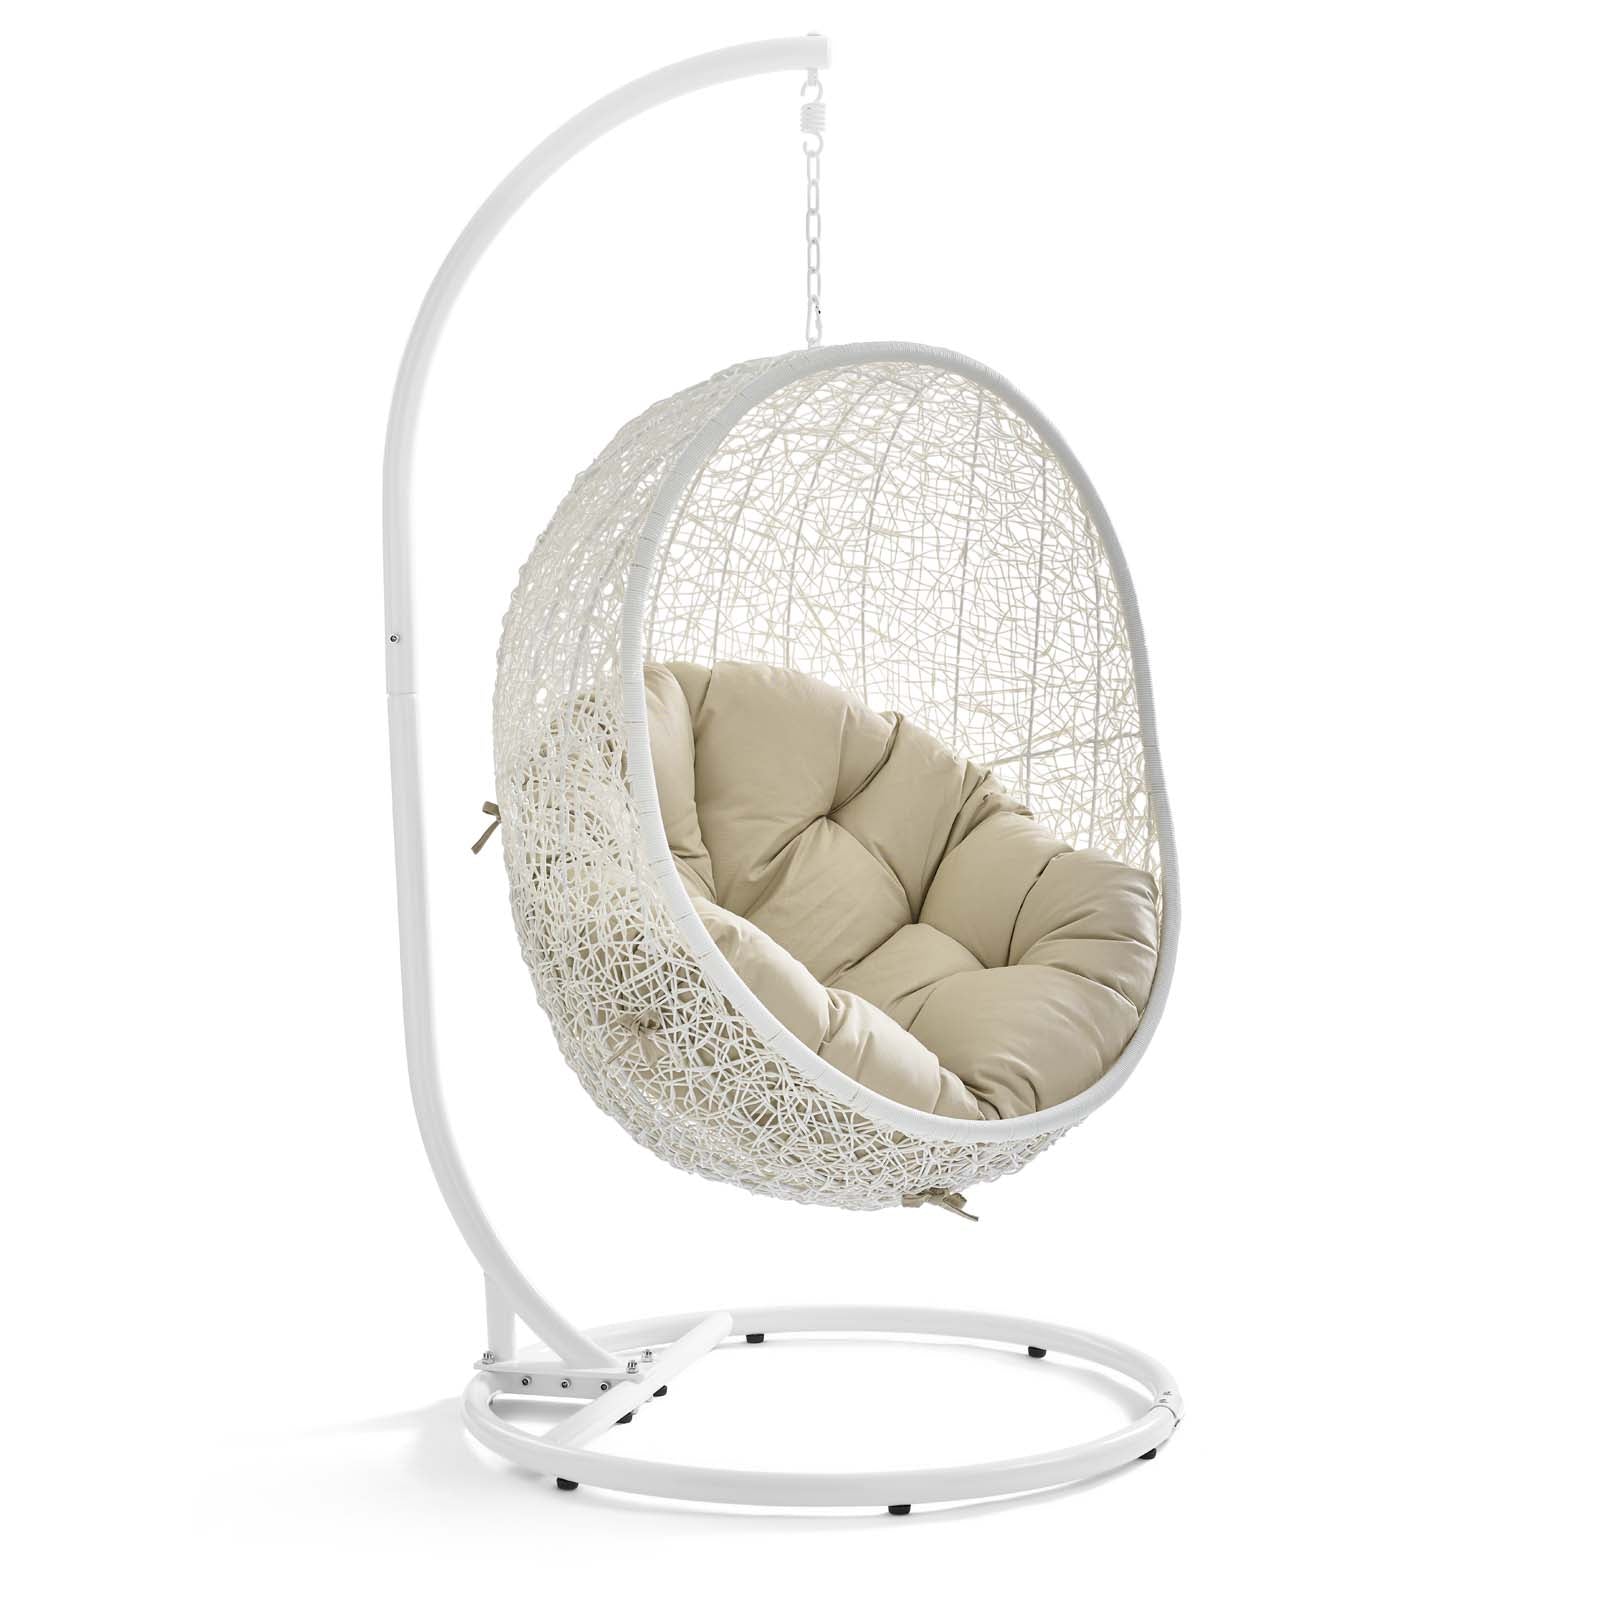 Modway Outdoor Swings - Hide Outdoor Patio Sunbrella Swing Chair With Stand White Beige